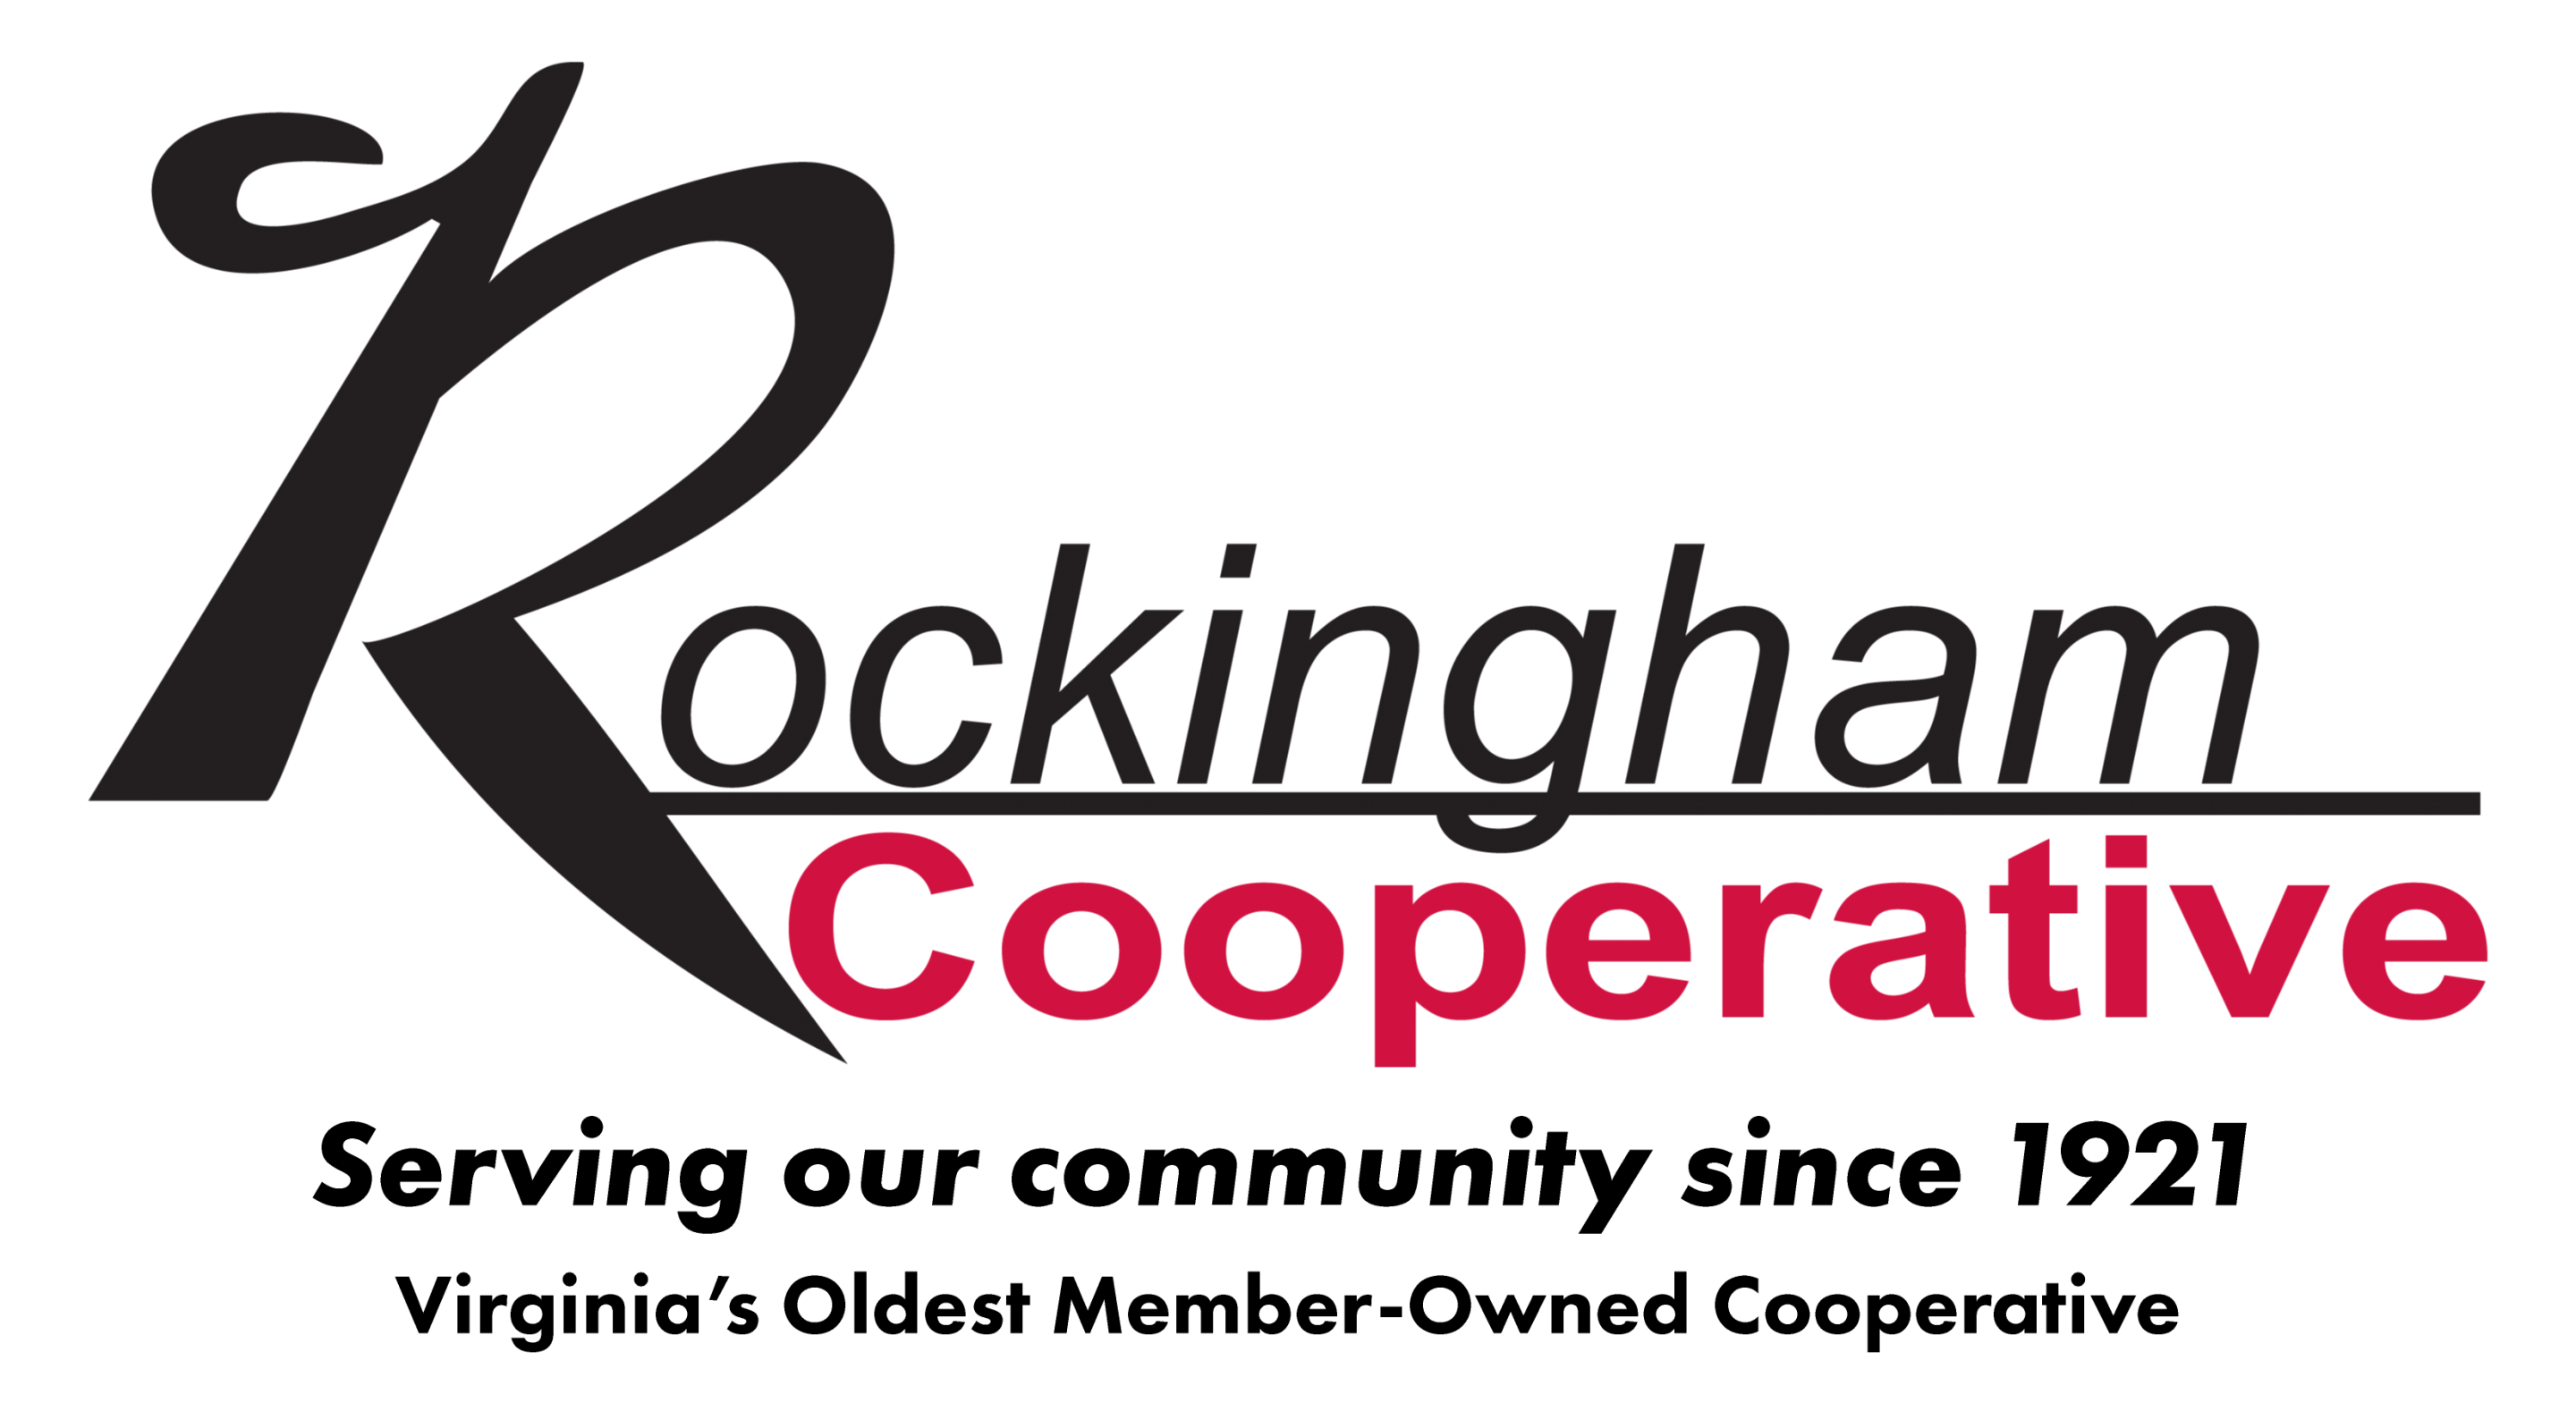 Announcing Drew Easter as new CFO Rockingham Cooperative